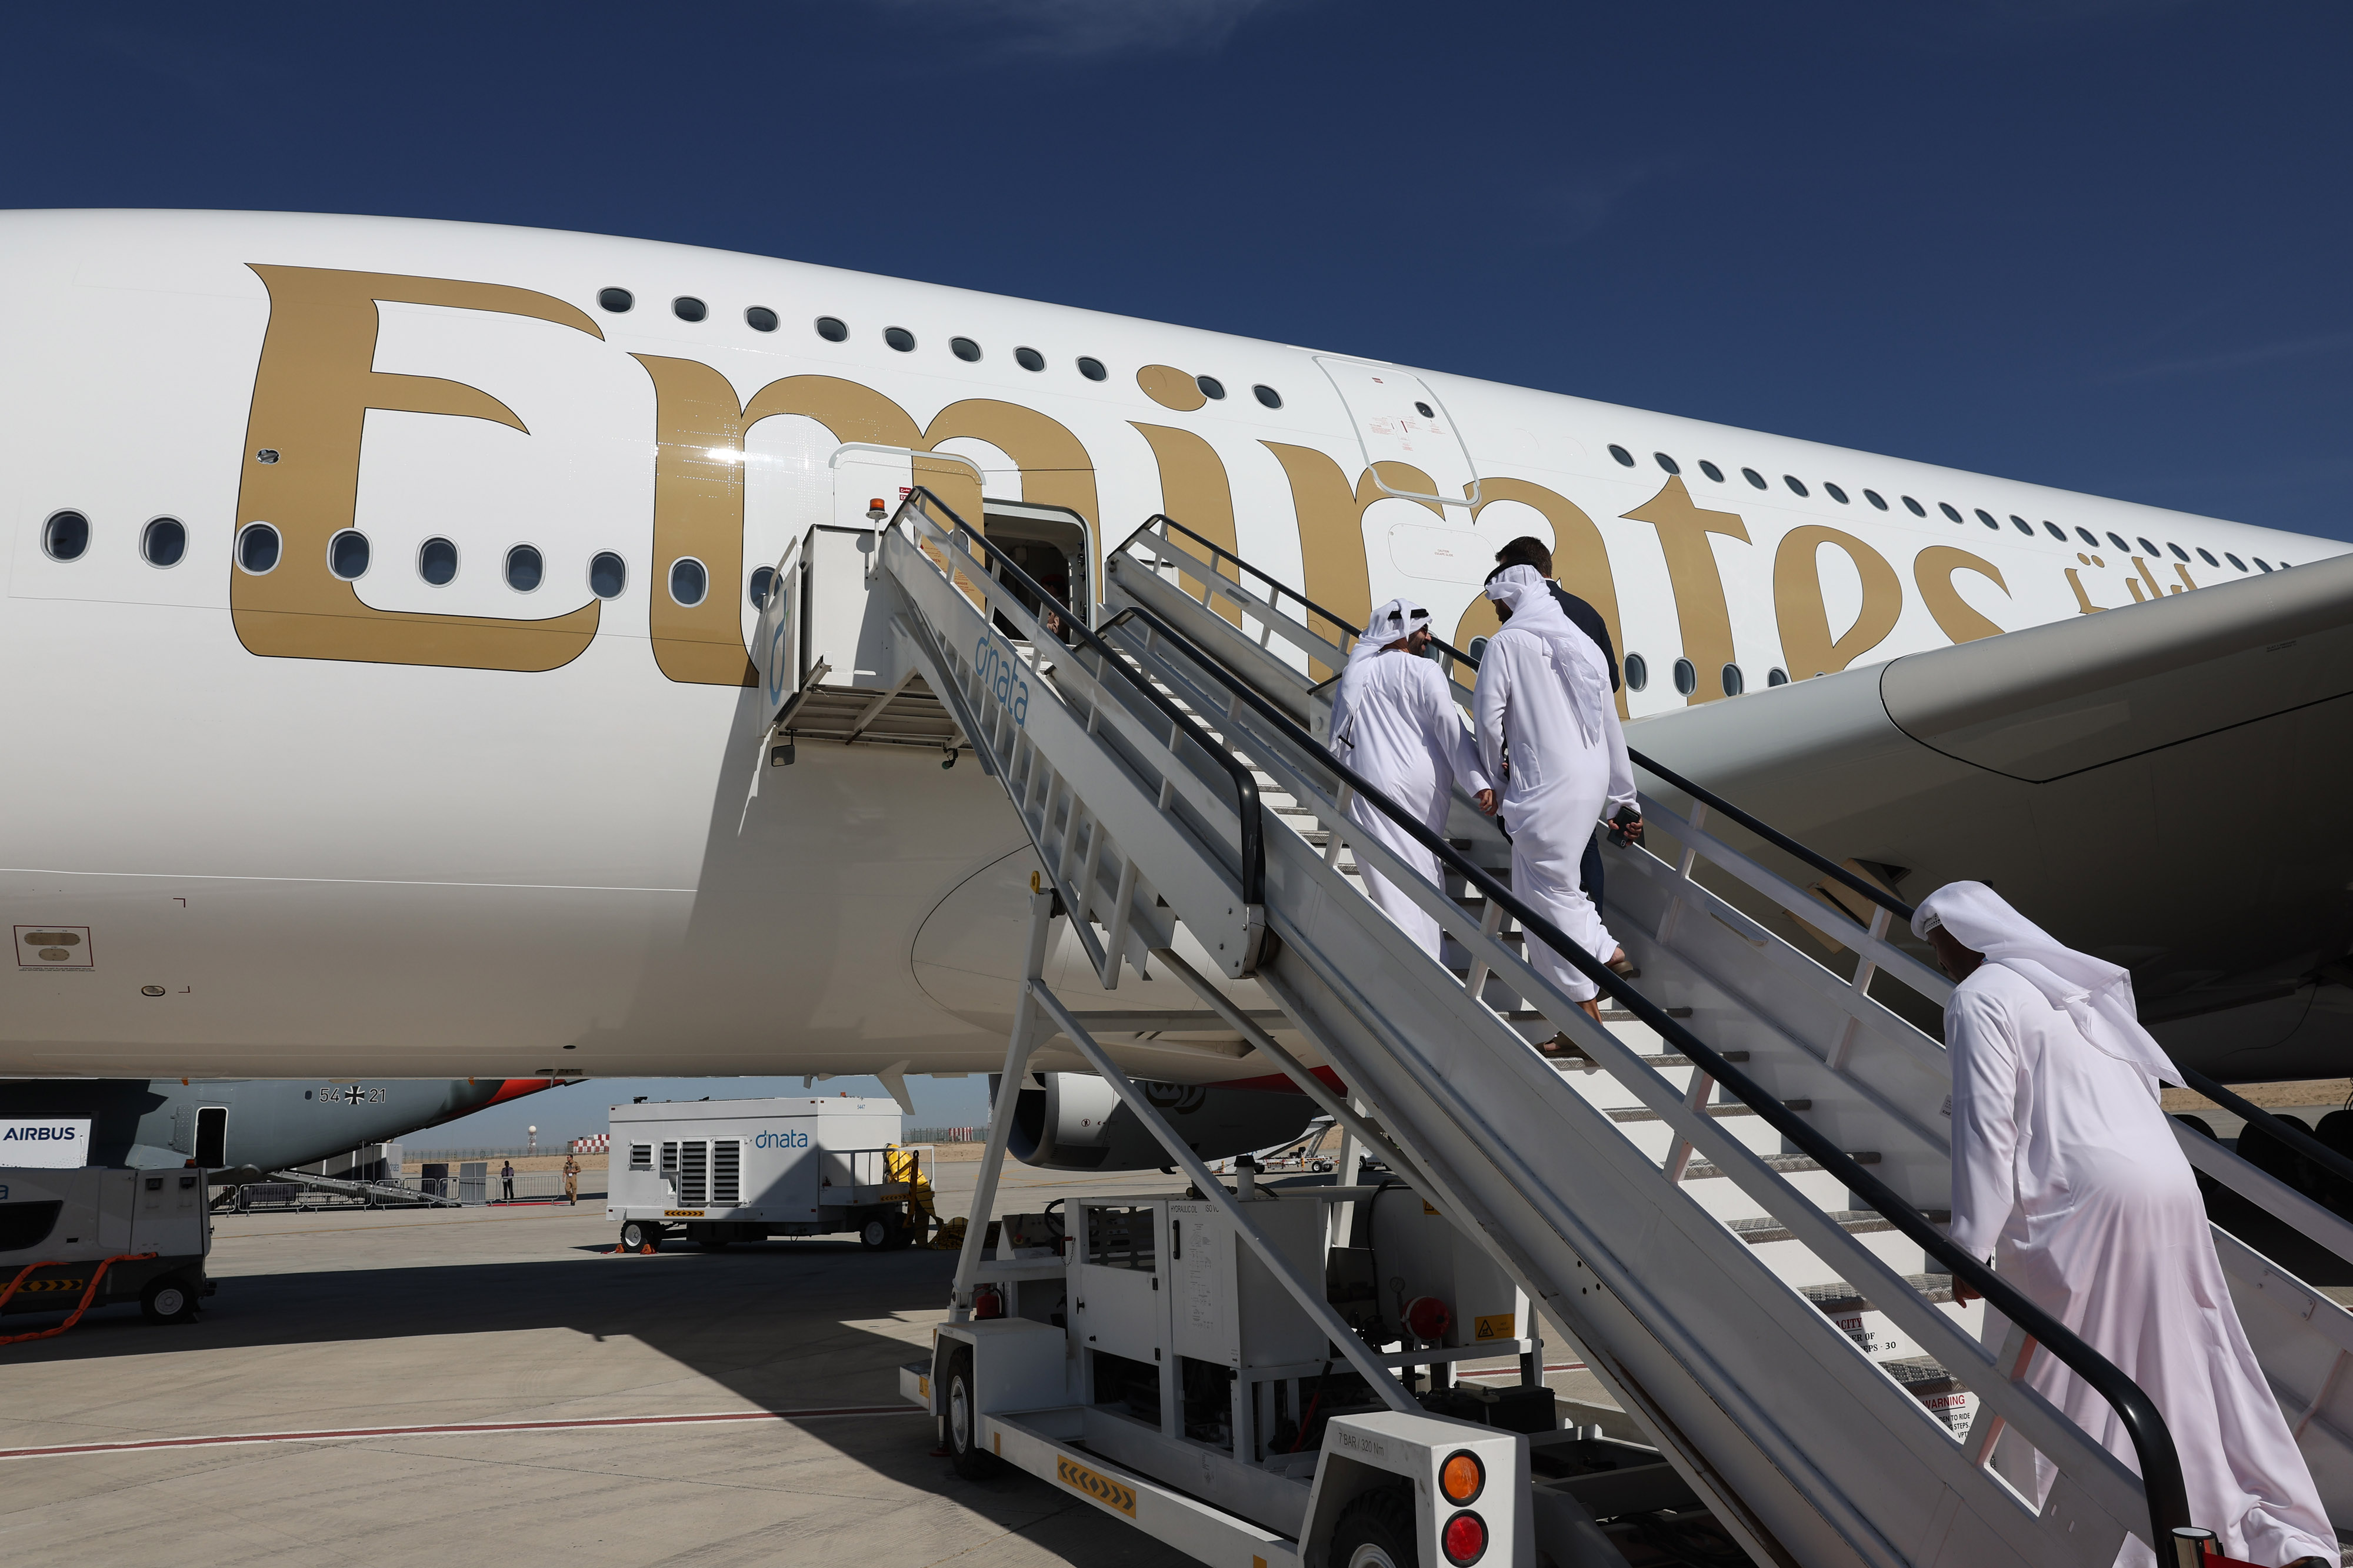 Visitors board an Emirates Airlines passenger aircraft in Dubai, United Arab Emirates.